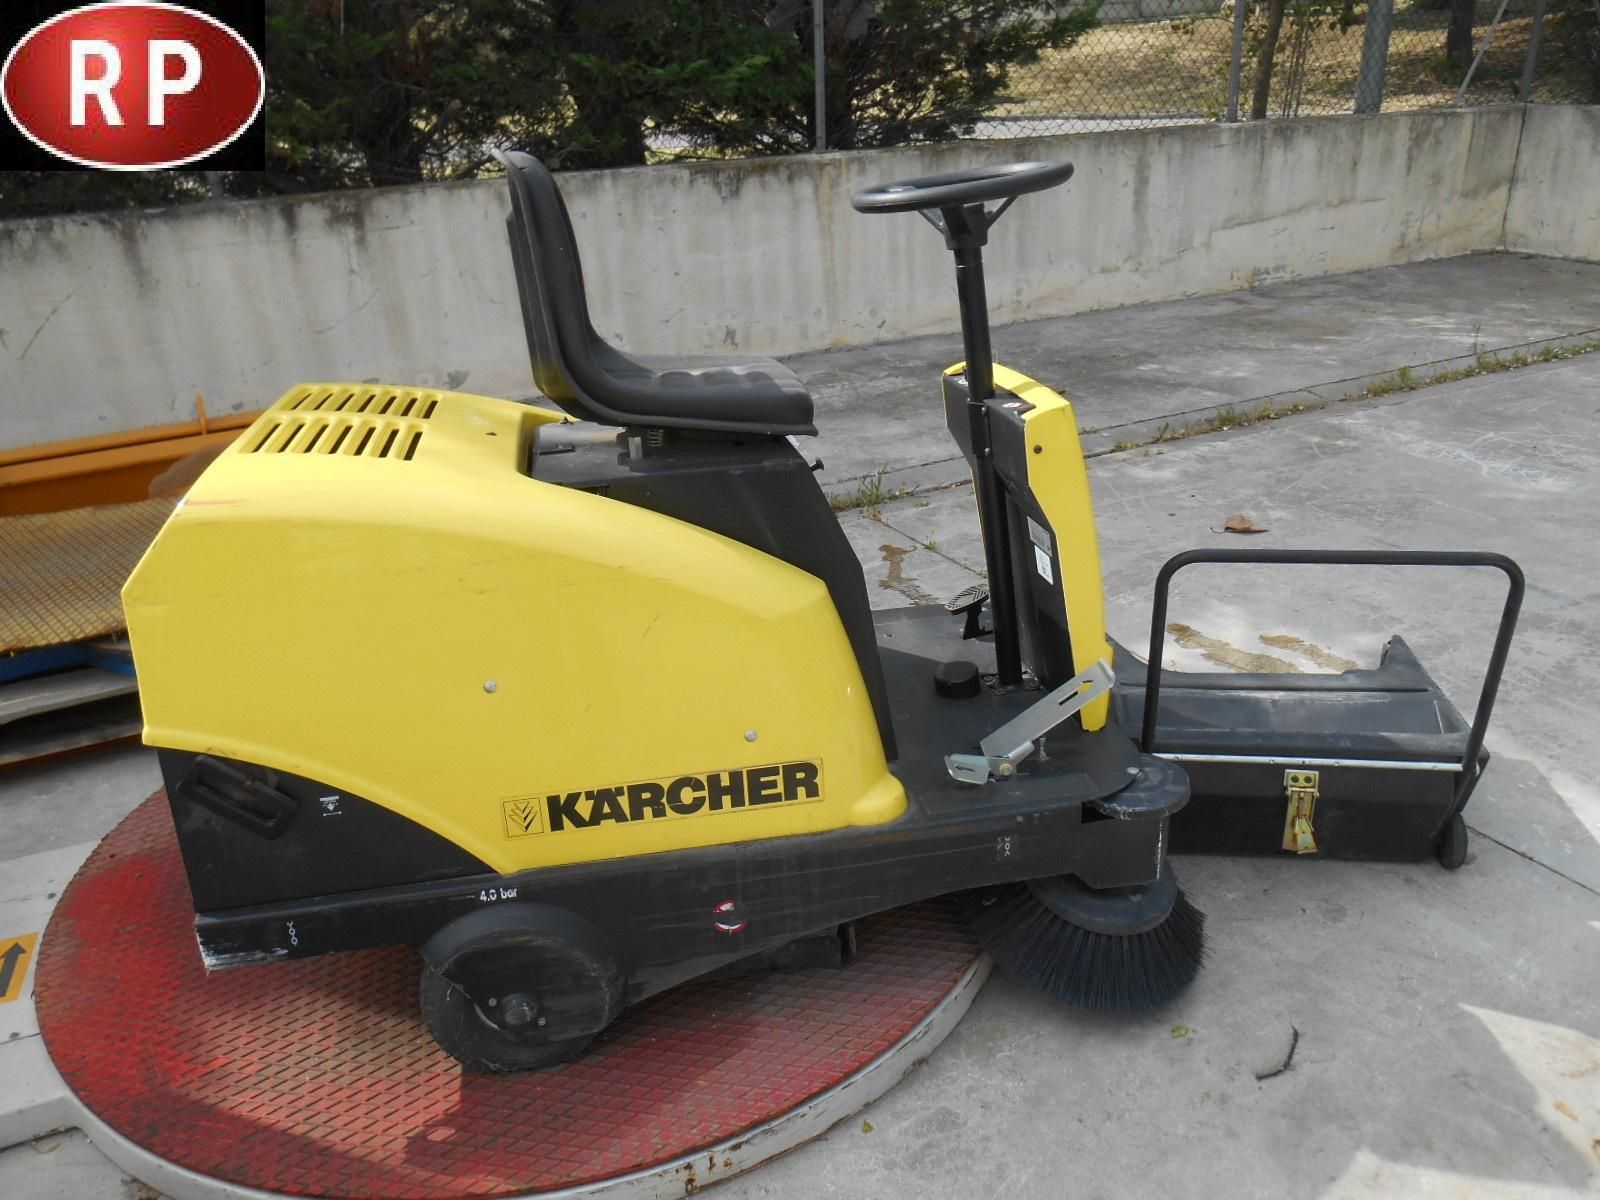 Null KÄRCHER. Thermal sweeper, model 1050S KMR, 1 brush missing,
to be revised.
&hellip;